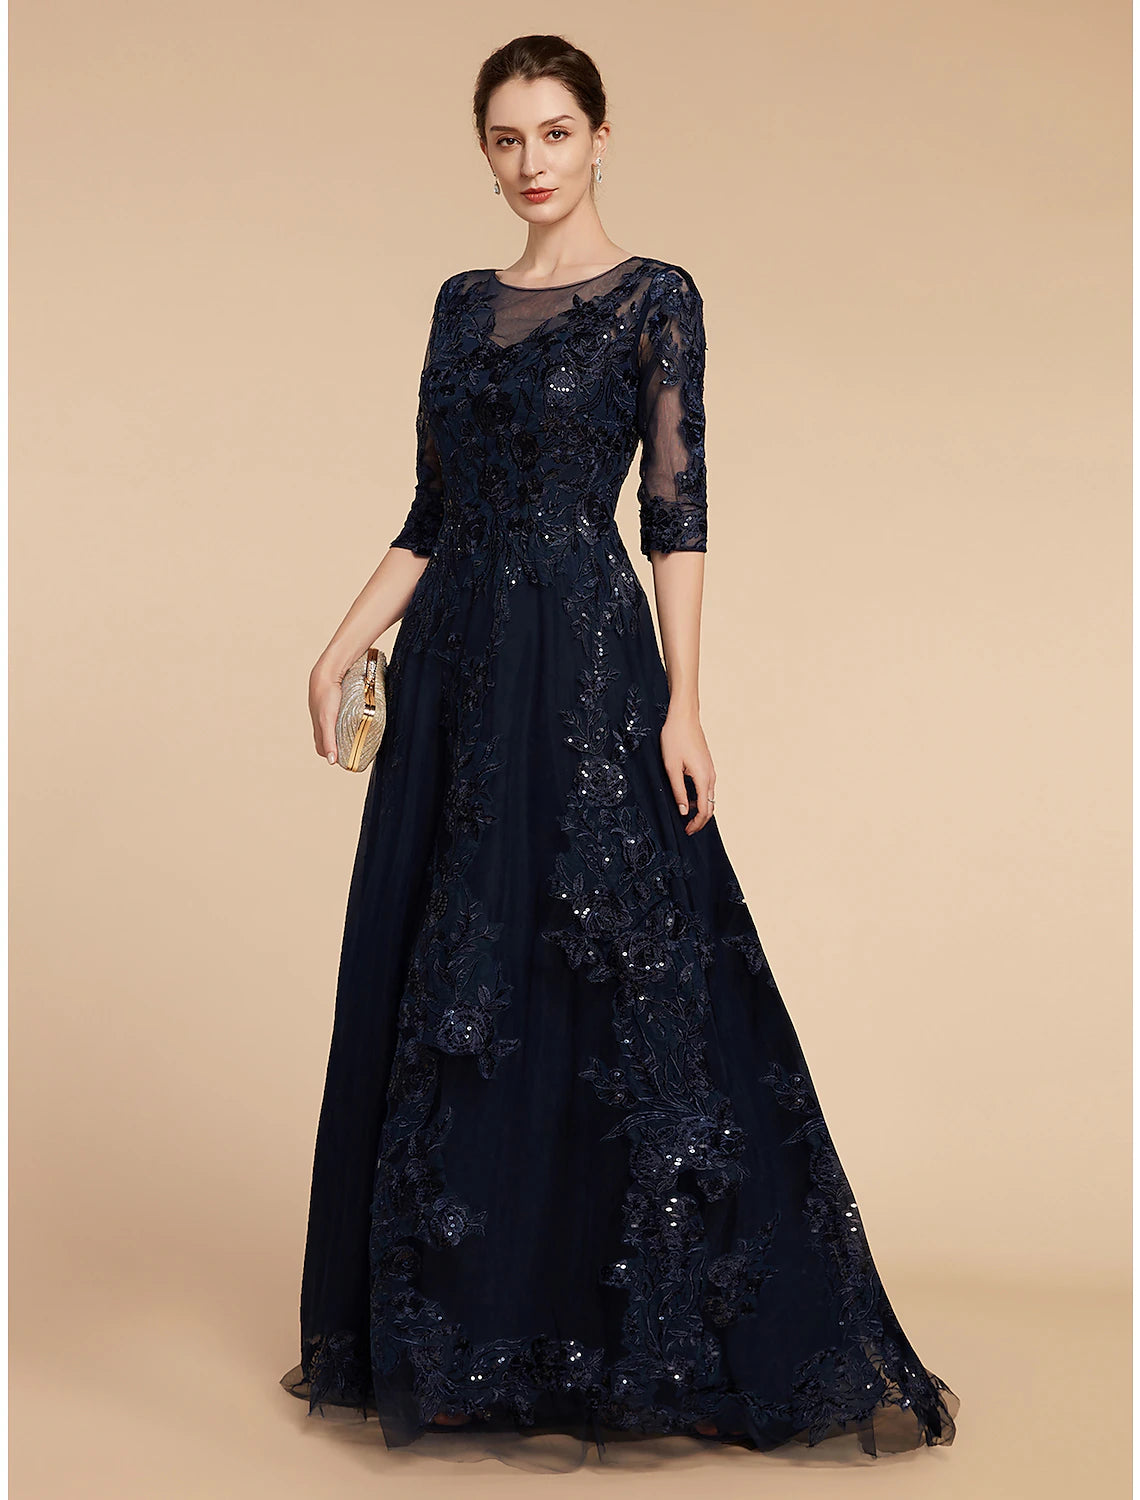 A-Line Mother of the Bride Dress Formal Wedding Guest Elegant Party Scoop Neck Floor Length Chiffon Lace 3/4 Length Sleeve with Sequin Appliques